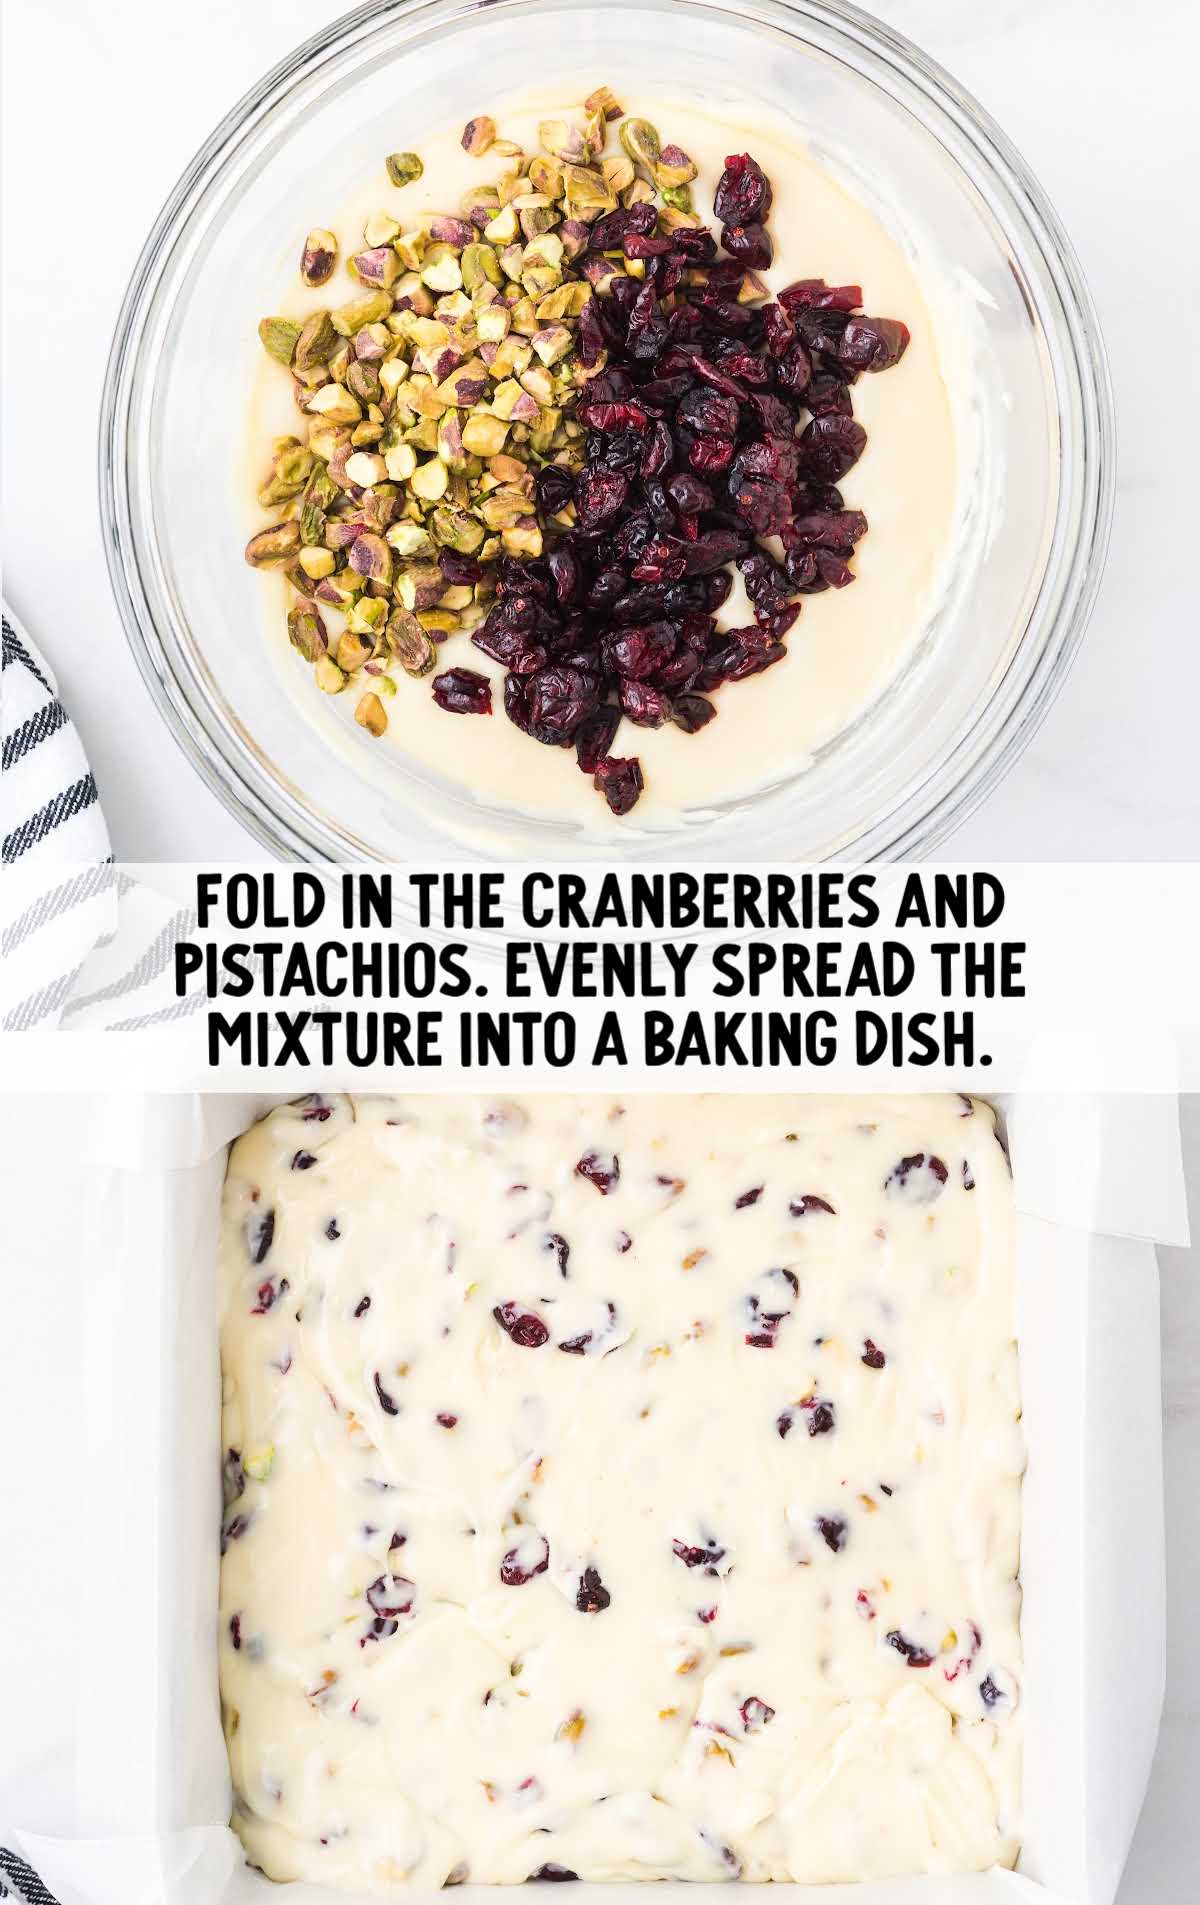 dried cranberries and chopped pistachios added to the fudge mixture and then mixture placed into a baking dish